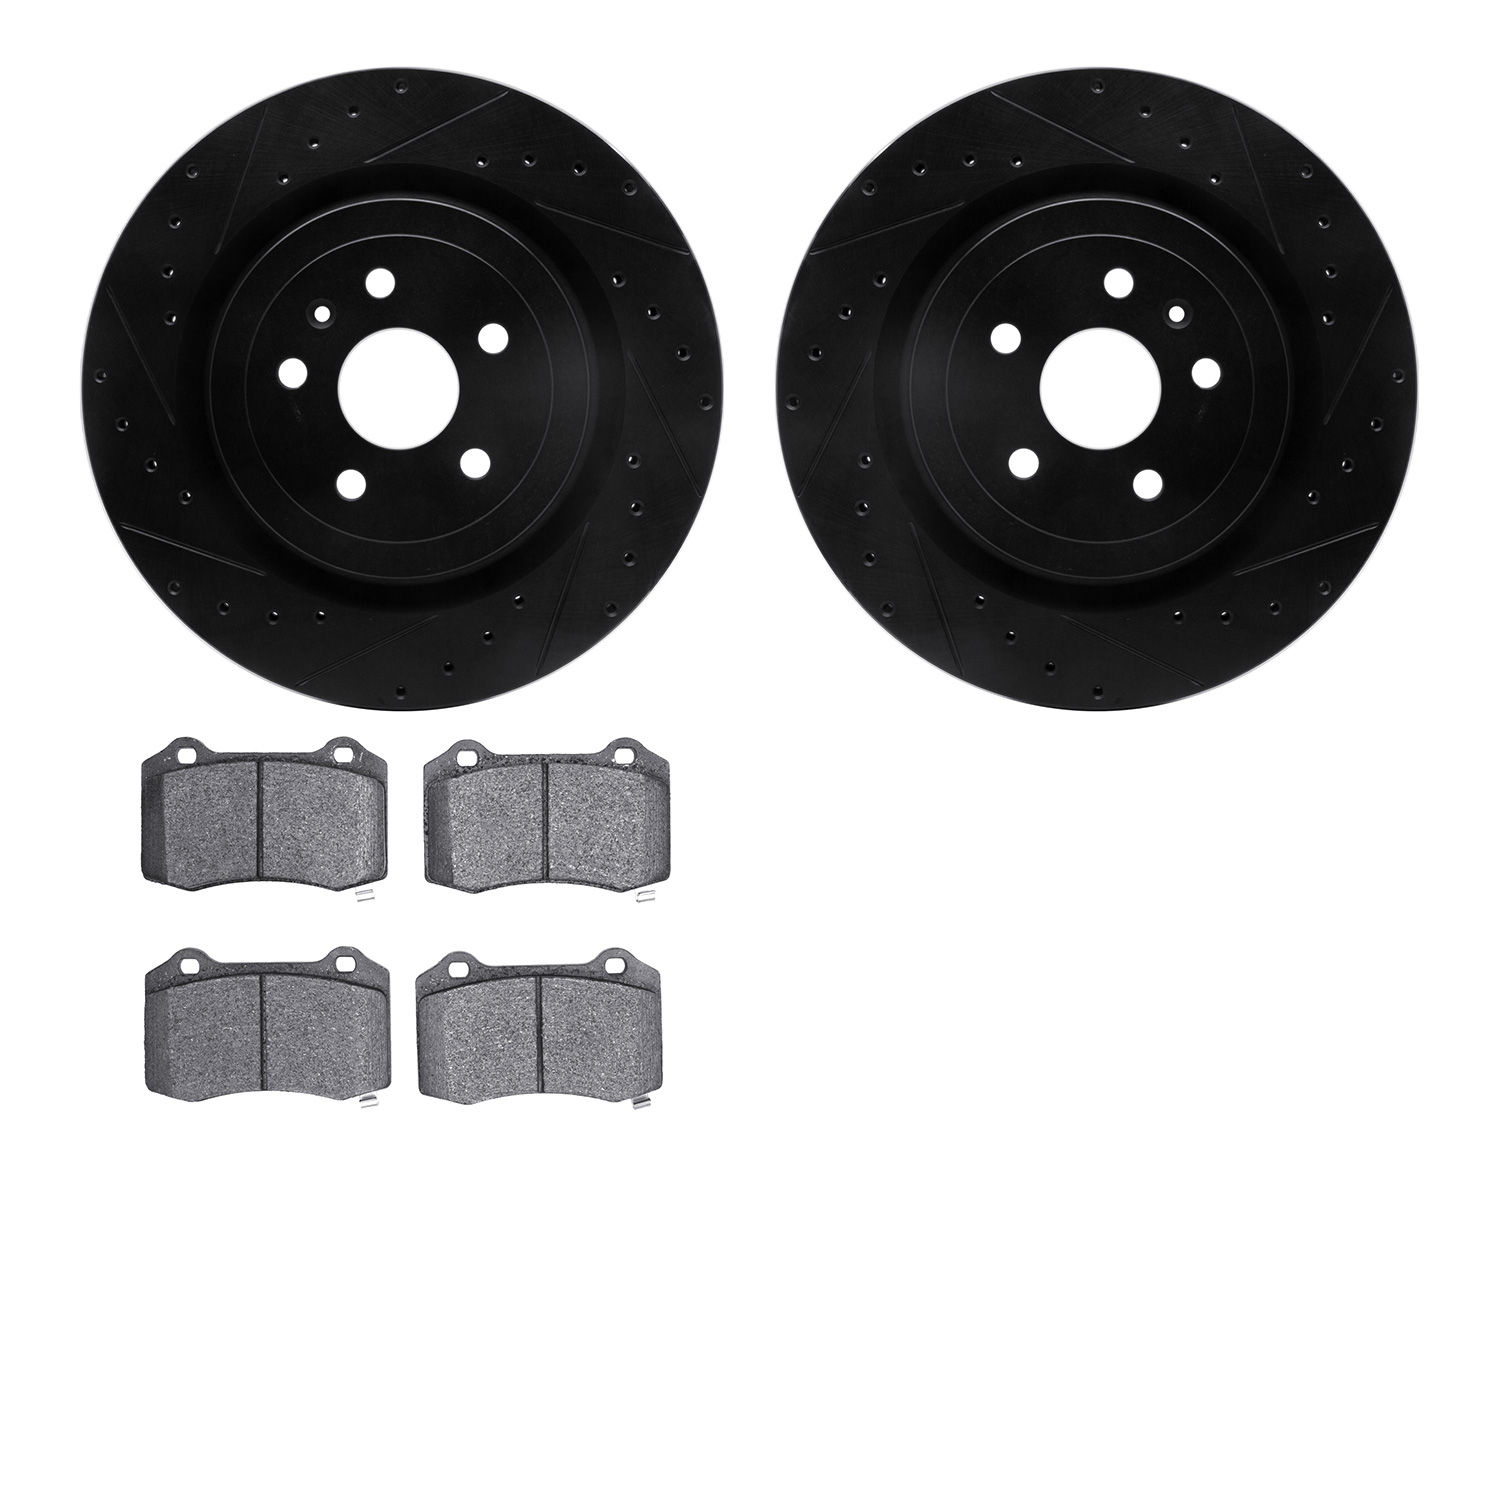 8402-47008 Drilled/Slotted Brake Rotors with Ultimate-Duty Brake Pads Kit [Black], Fits Select GM, Position: Rear